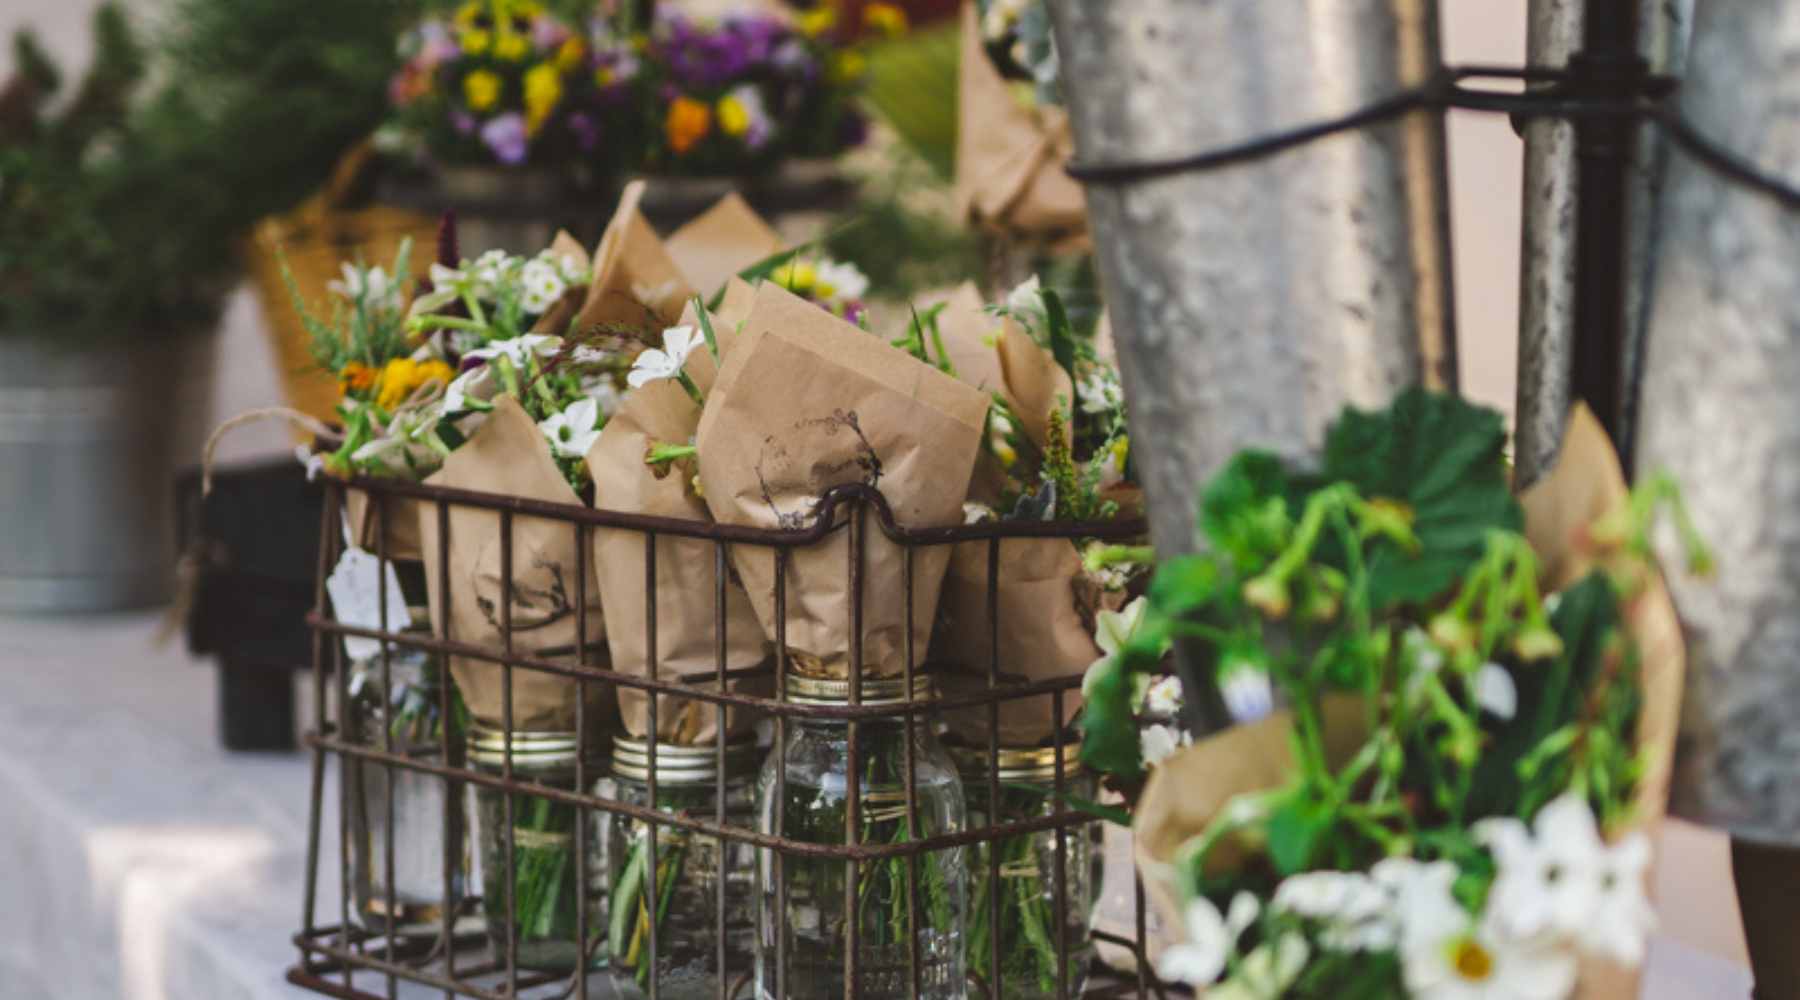 Bouquets of flowers wrapped in brown paper and placed in mason jars. The jarred bouquets are inside of a wire basket sitting on a curb.  